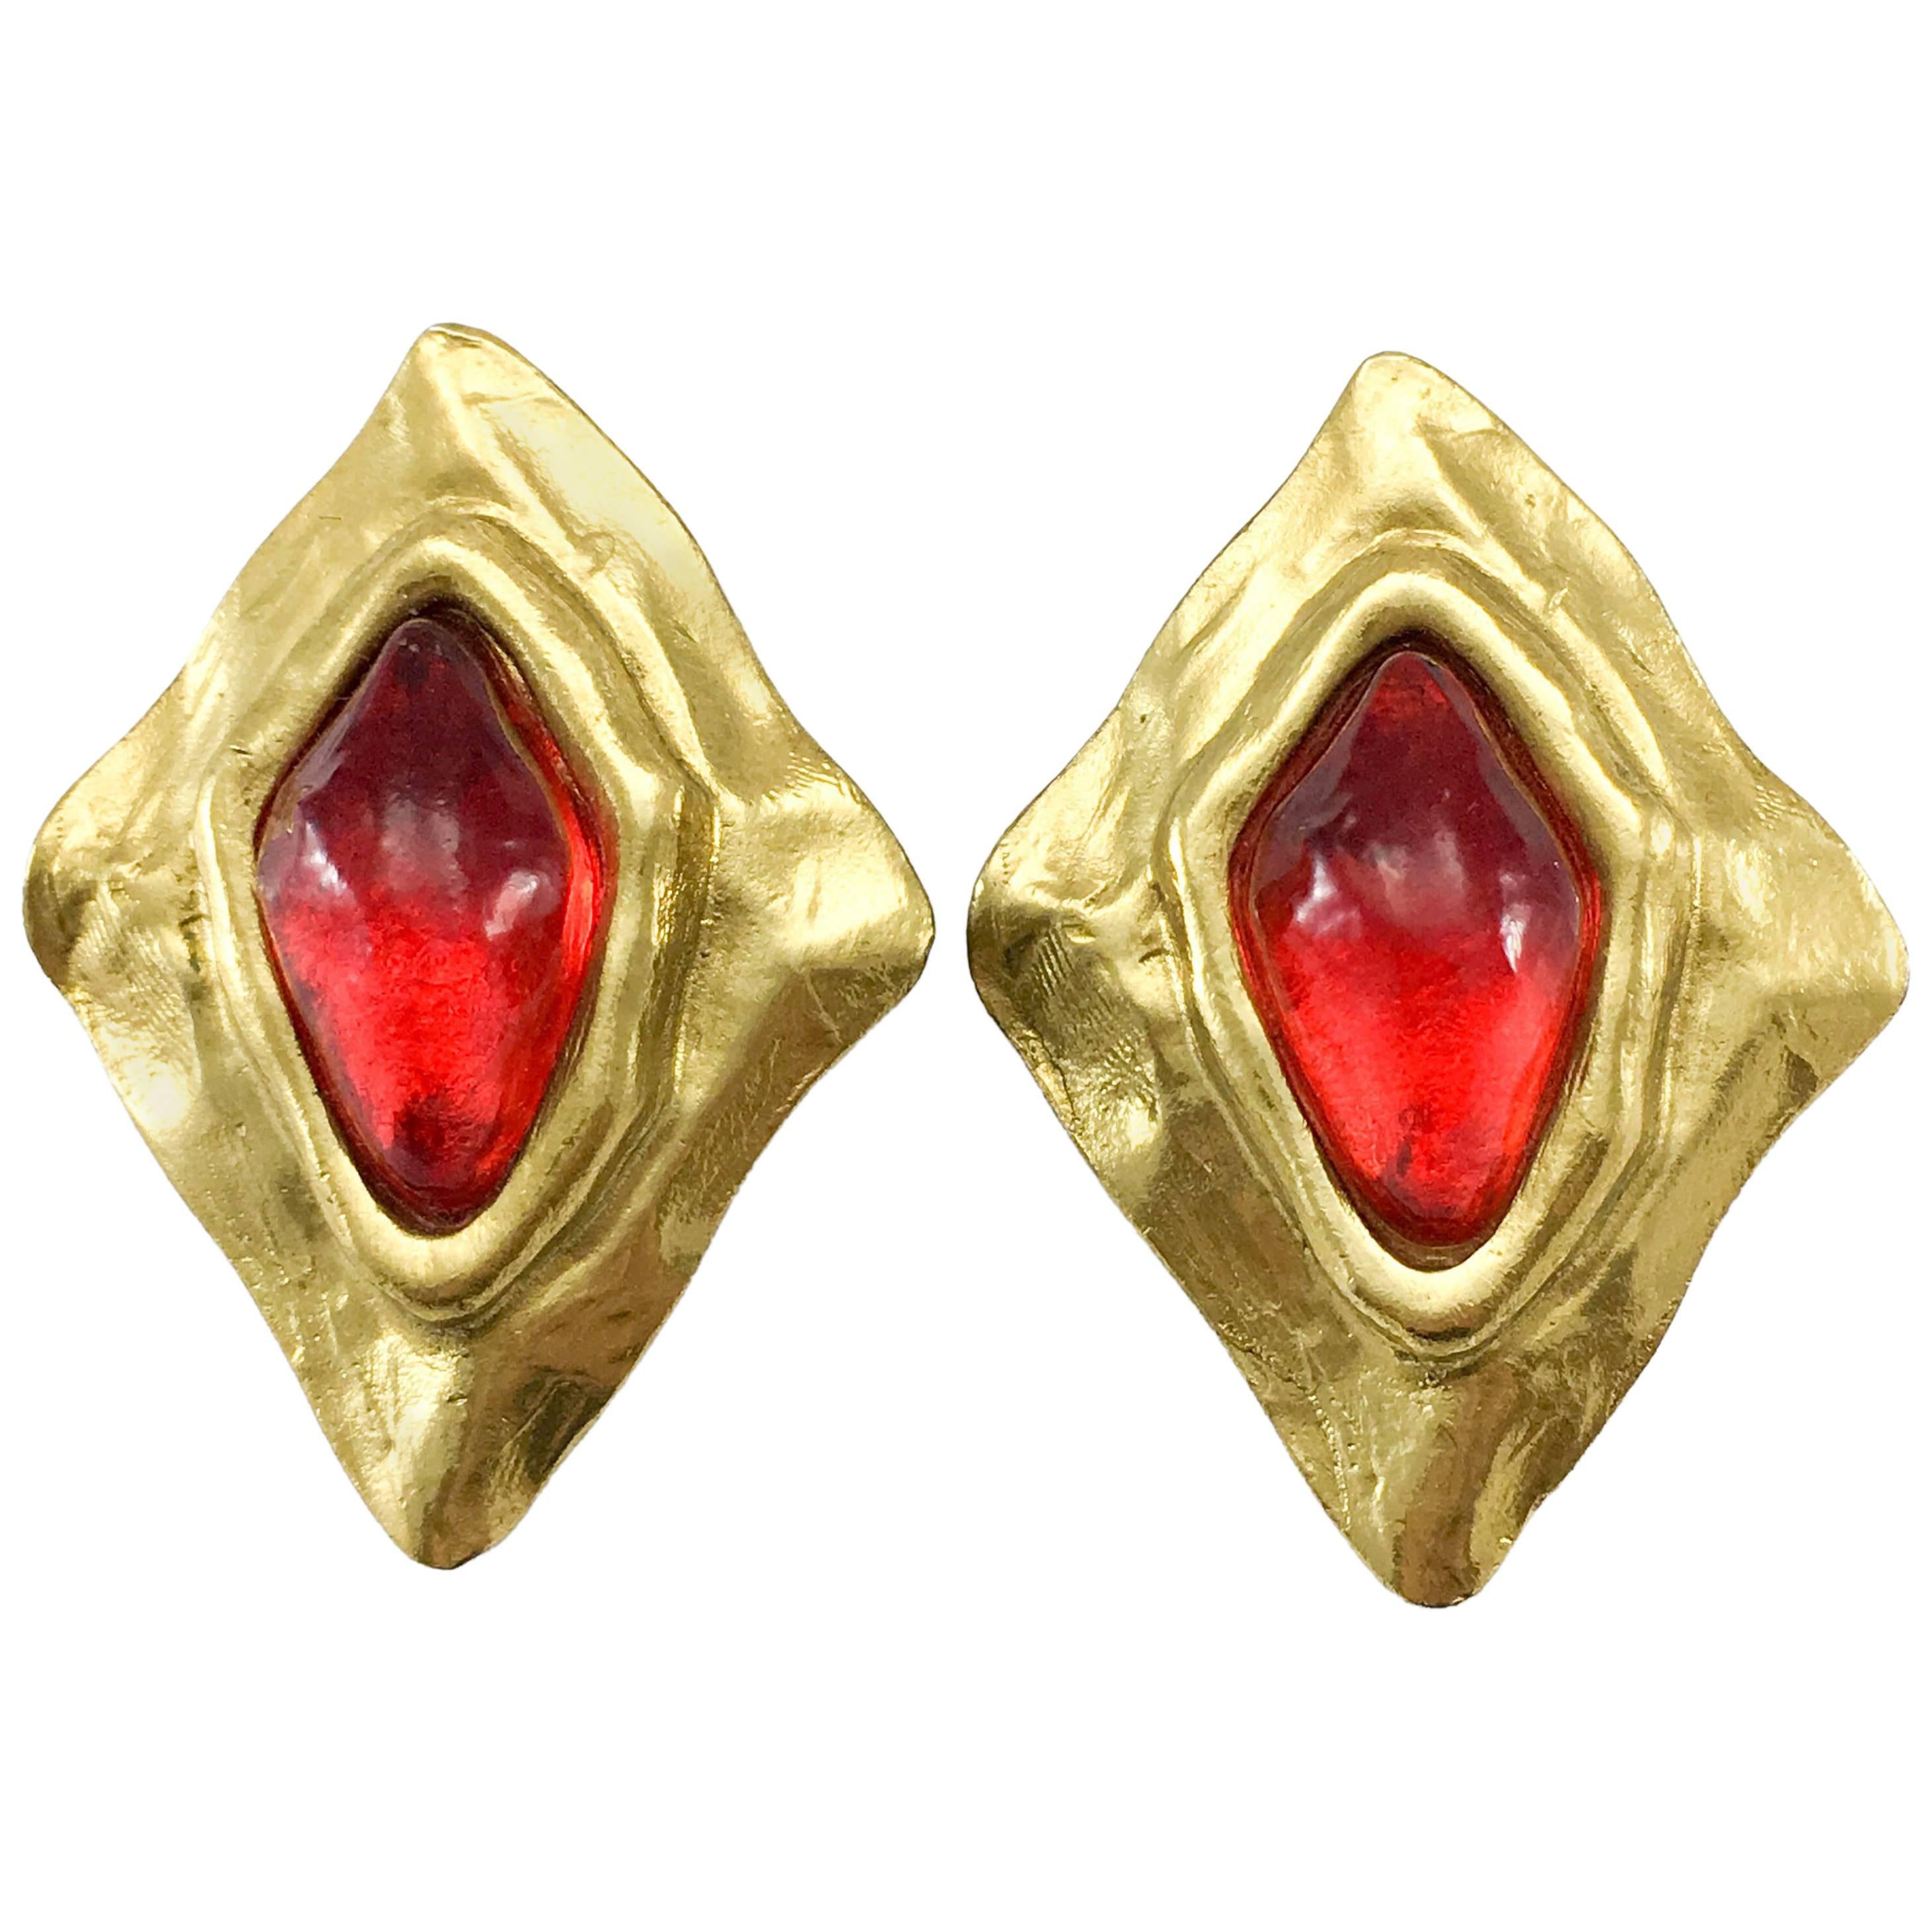 1980s Yves Saint Laurent Large Red Gripoix Gold-Plated Earrings by Goossens